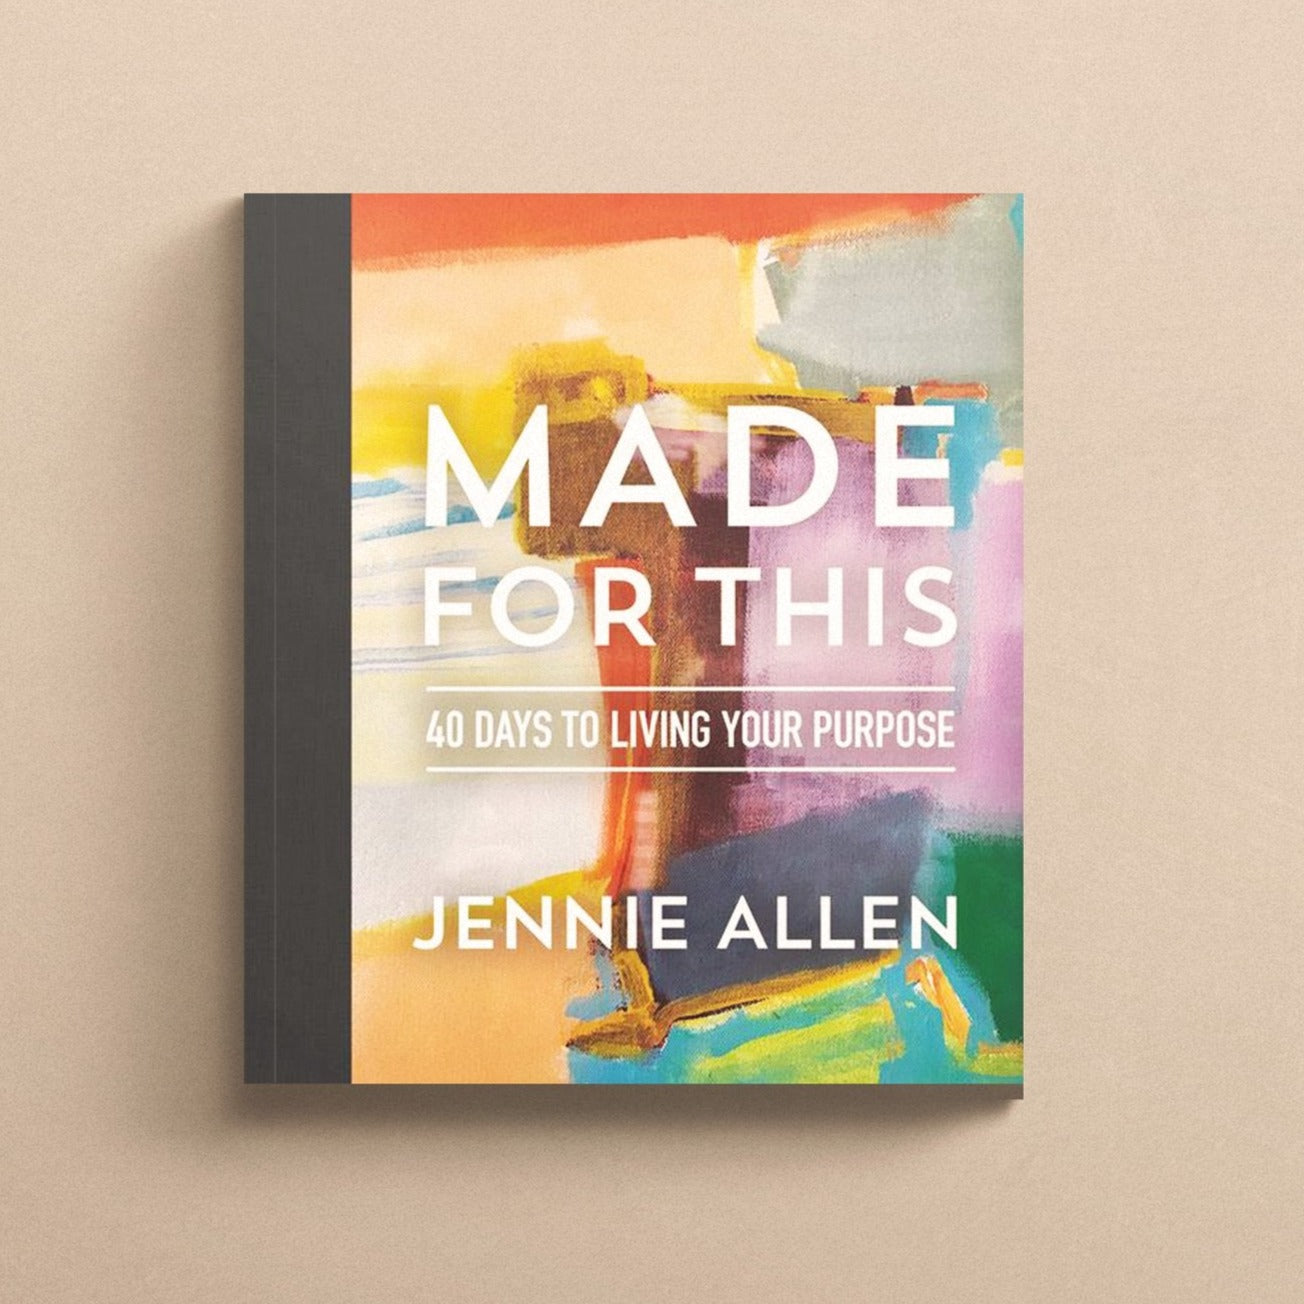 Made for This by Jennie Allen